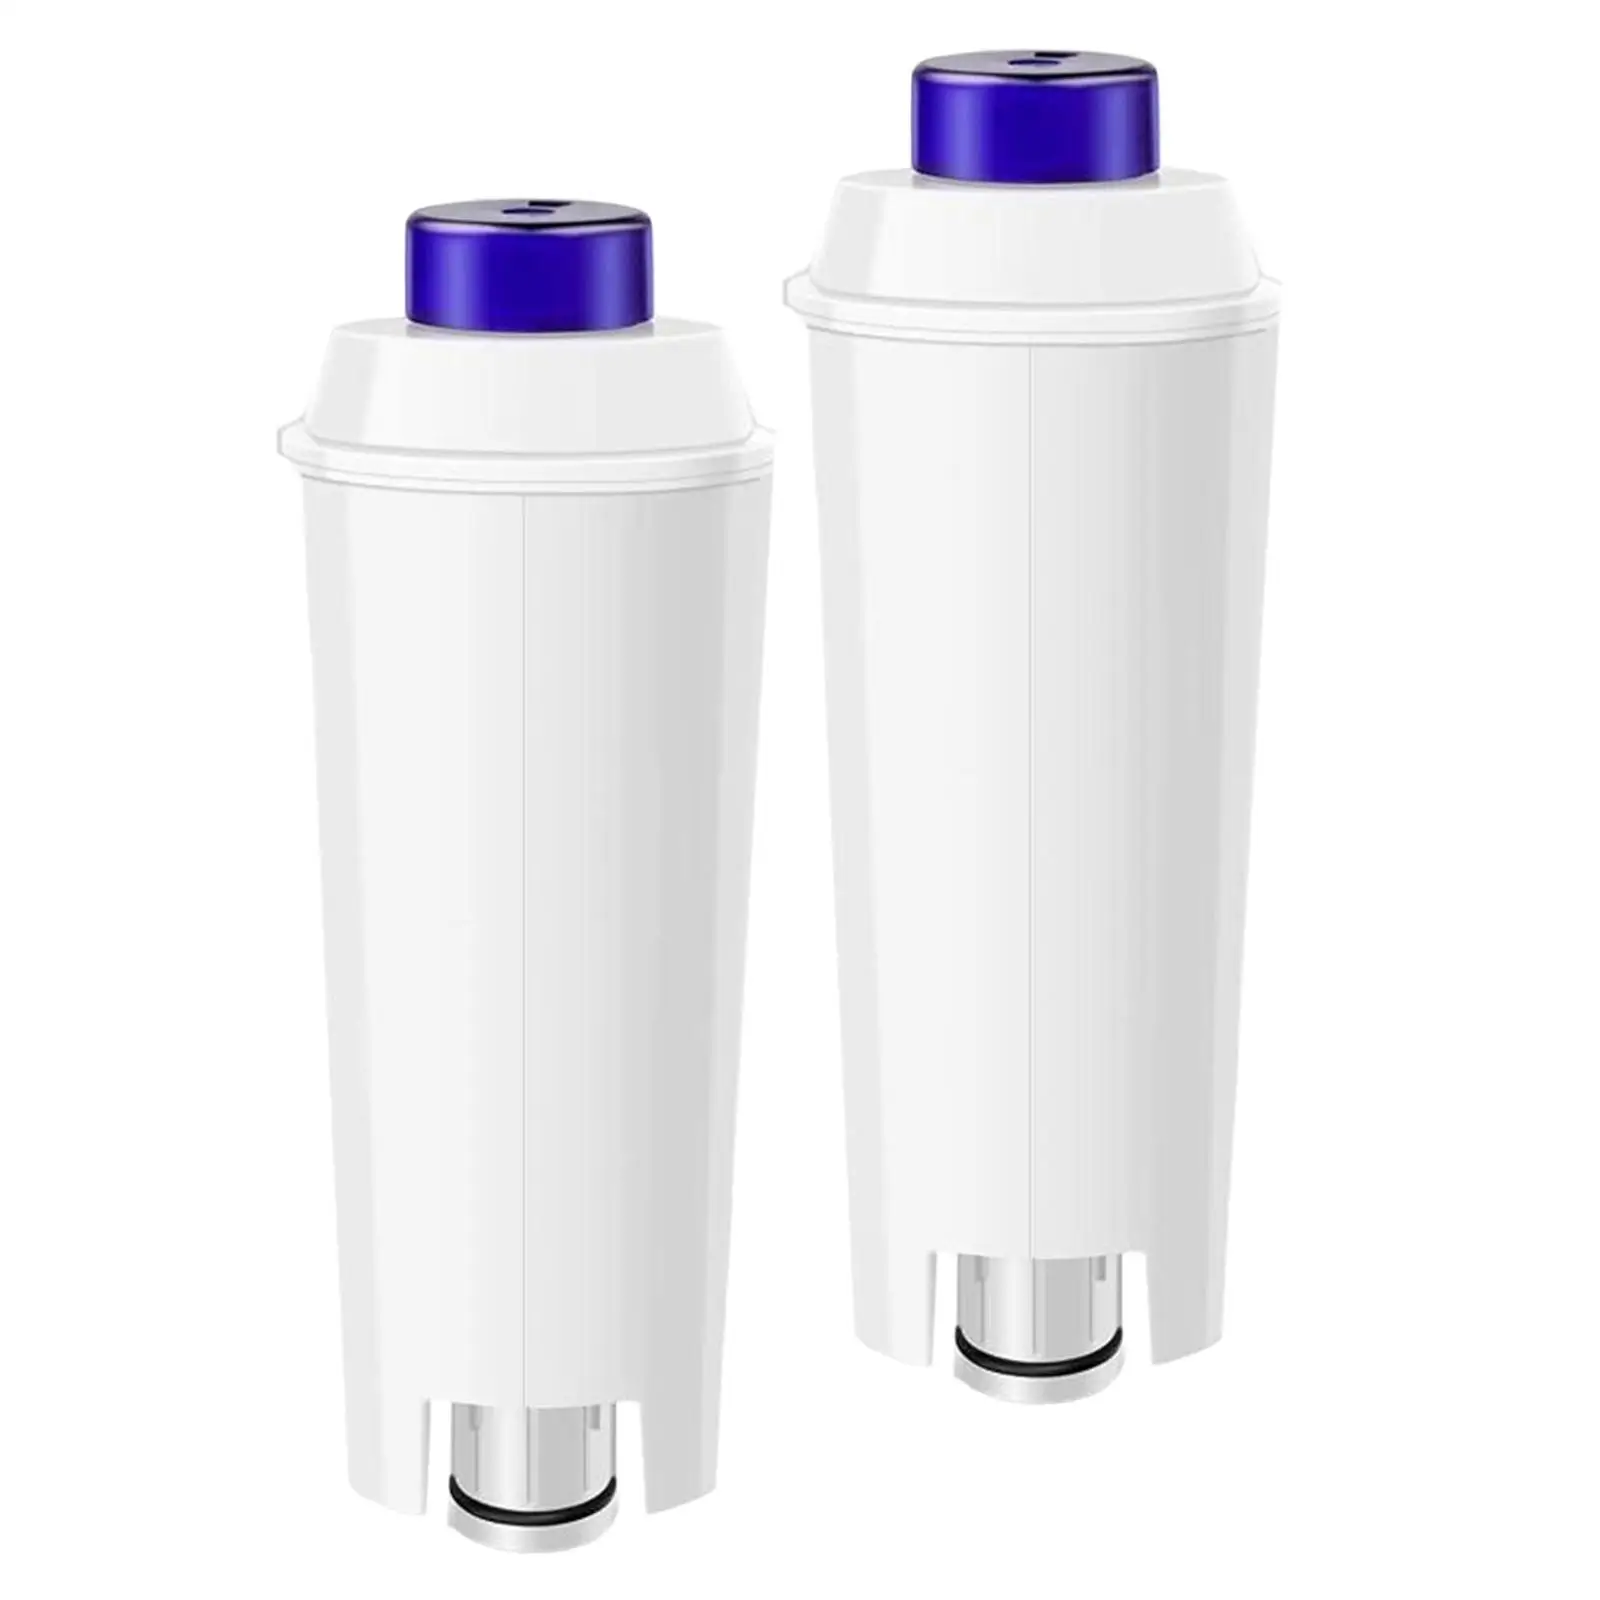 2Pcs Coffee Machine Water Filter Fittings Spare Coffee Maker Lightweight for Taste Filtration Cartridges Coffee Machines